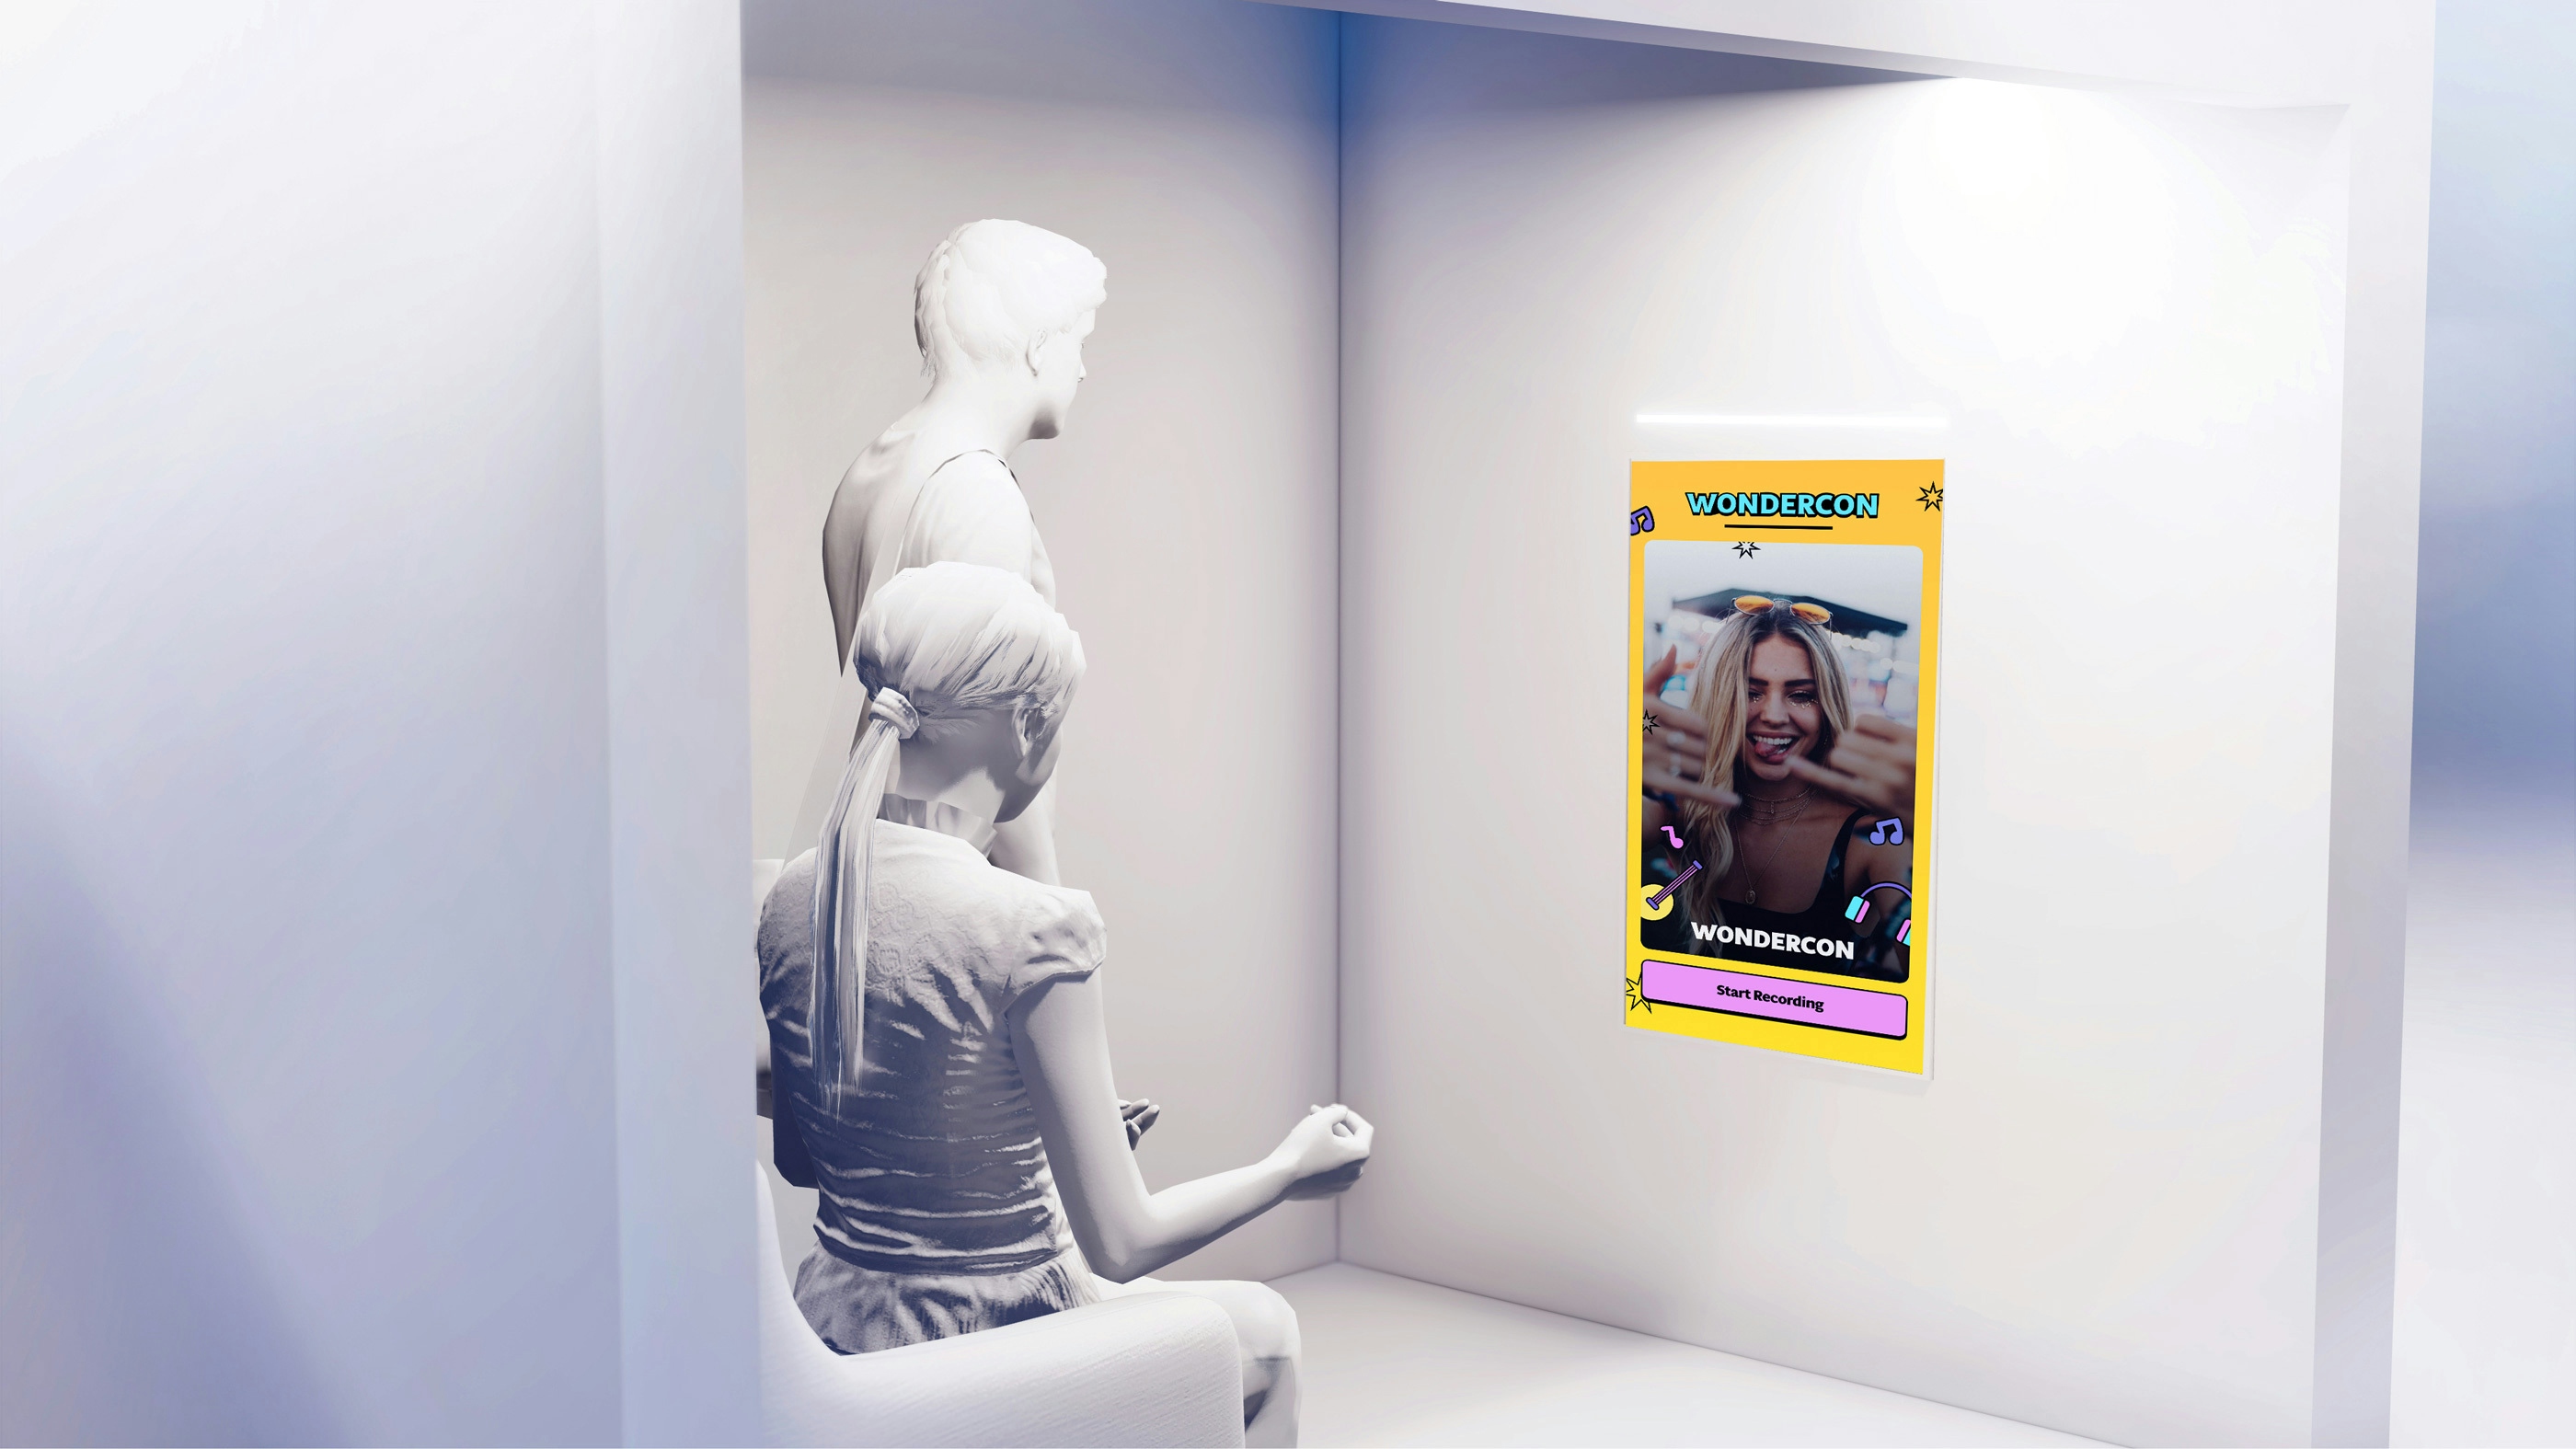 Unleash your inner performer with a leave-a-message video booth.